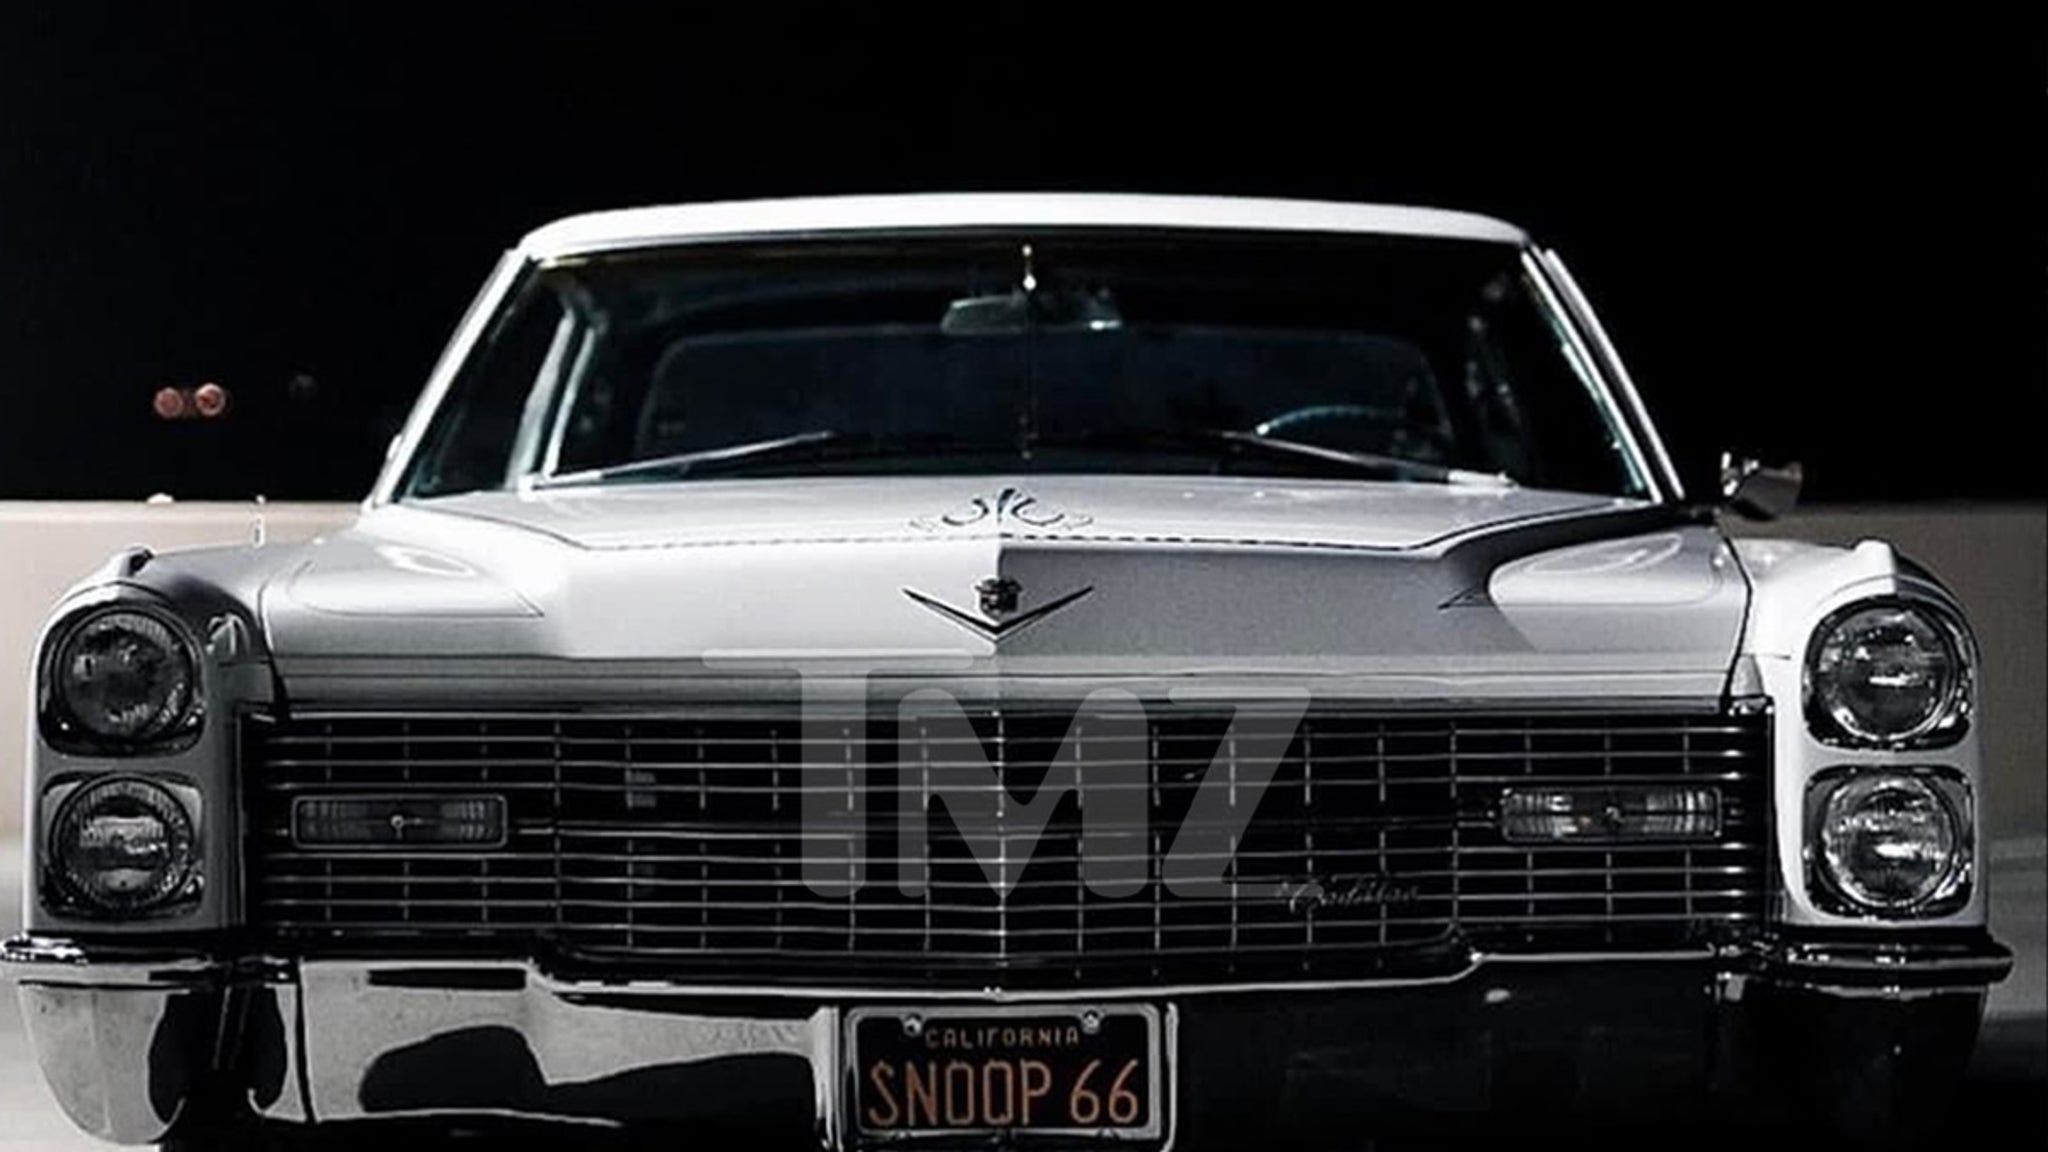 'Snoop DeVille' From 50 Cent's 'P.I.M.P.' Video Up for Sale